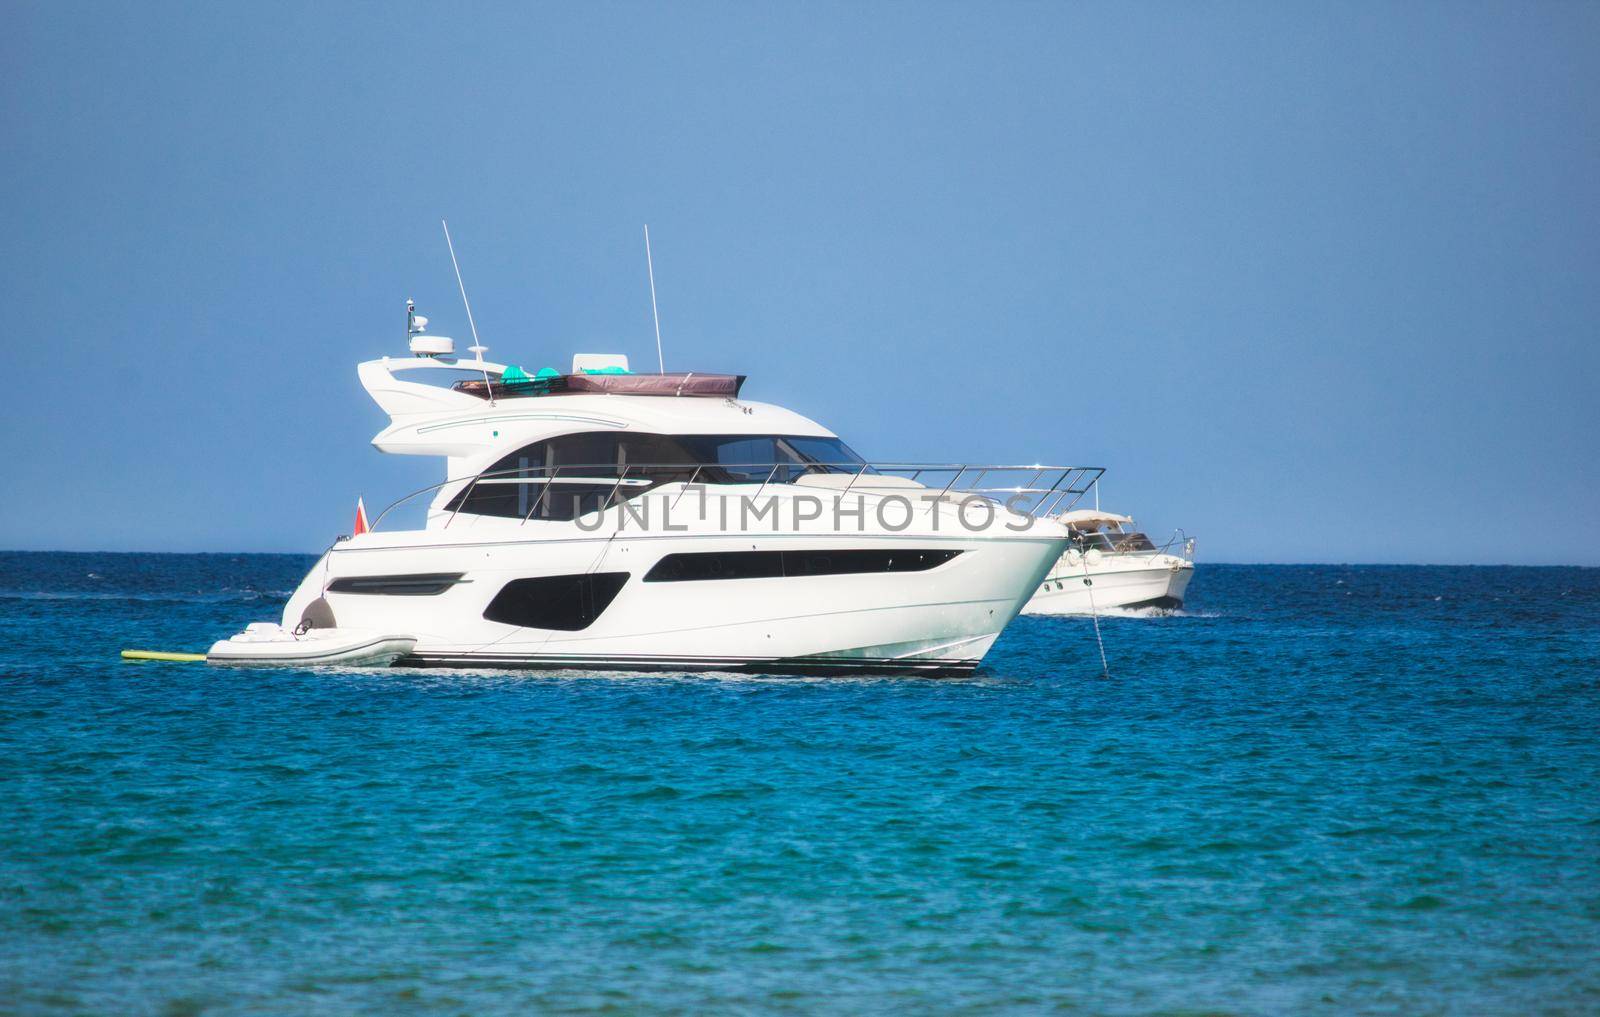 A luxury yacht sailing on the sea with clear blue sky and horizon visible in the background by tennesseewitney